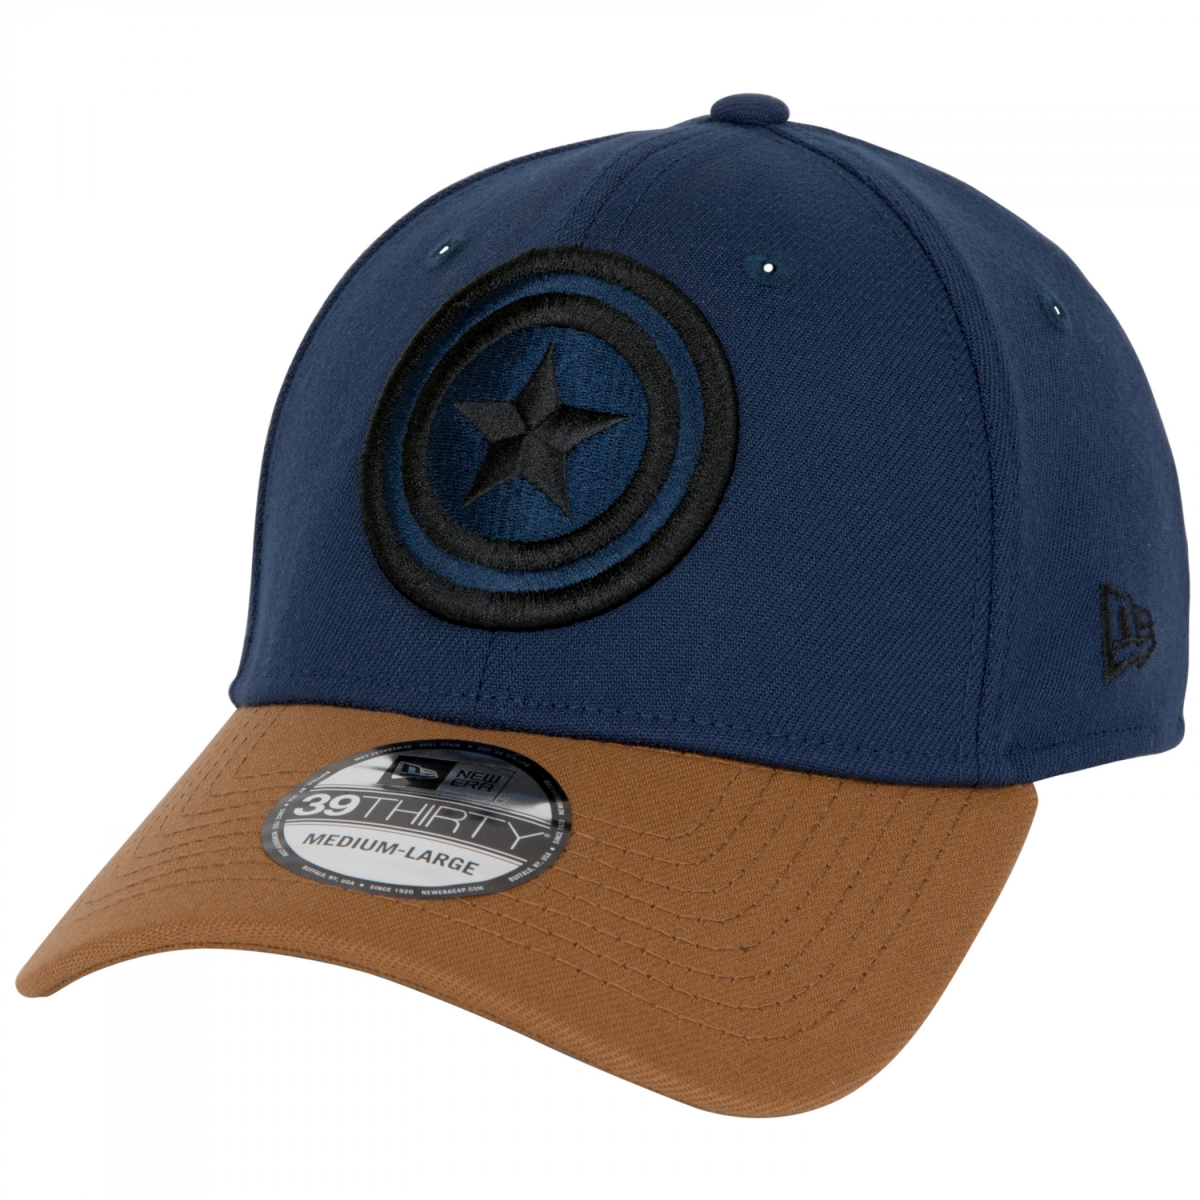 Picture of Captain America 865333-large-xla Captain America Nomad Armor Era 39Thirty Fitted Hat&#44; Blue & Brown - Large & Extra Large